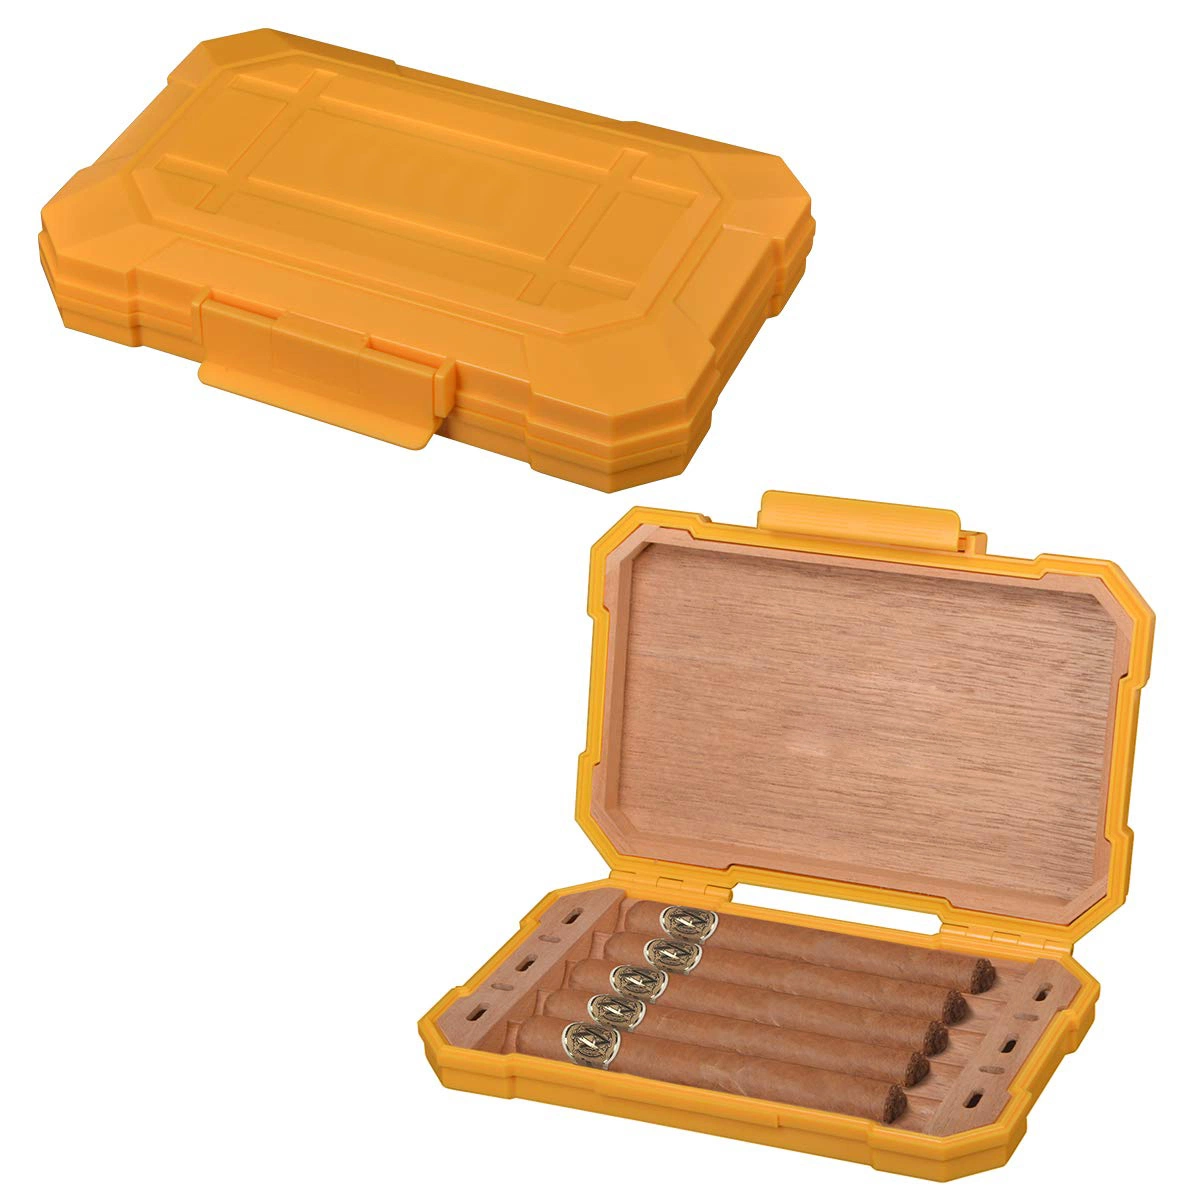 Portable Cigar Humidor Case Waterproof Travel Cigar Case with 2 Humidifiers Cedar Wood Lined for 5 Cigars